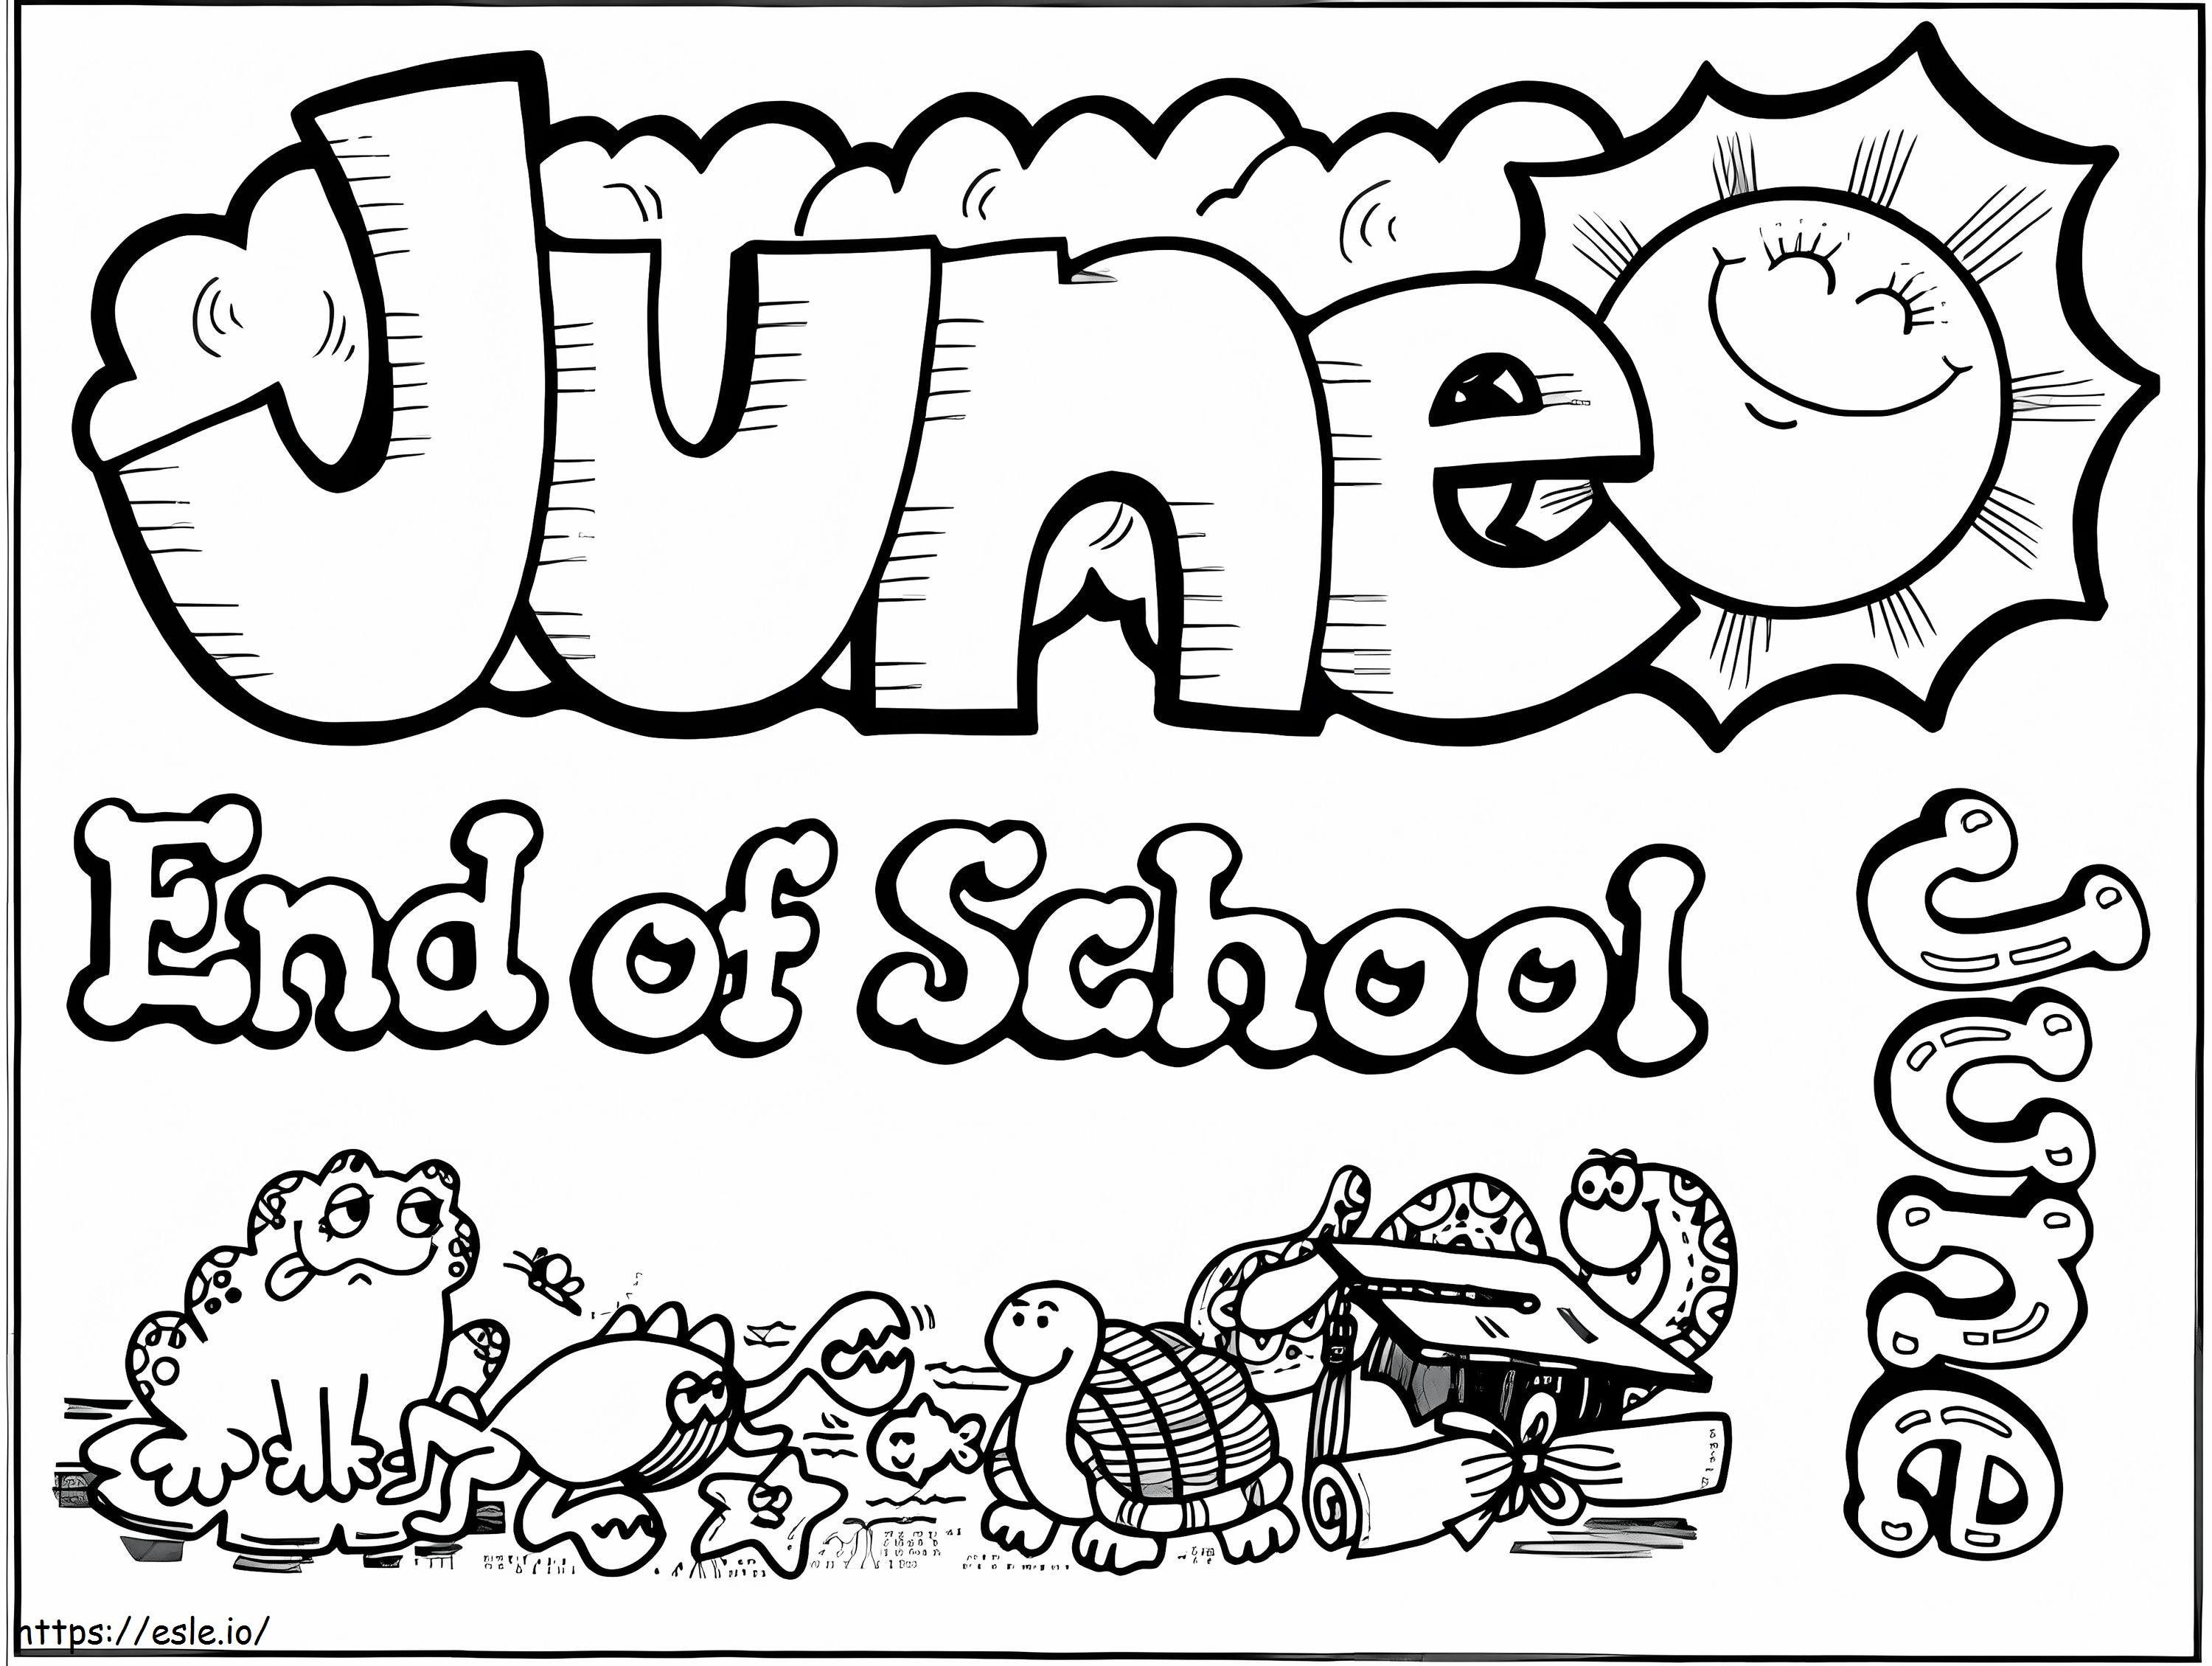 End Of School coloring page